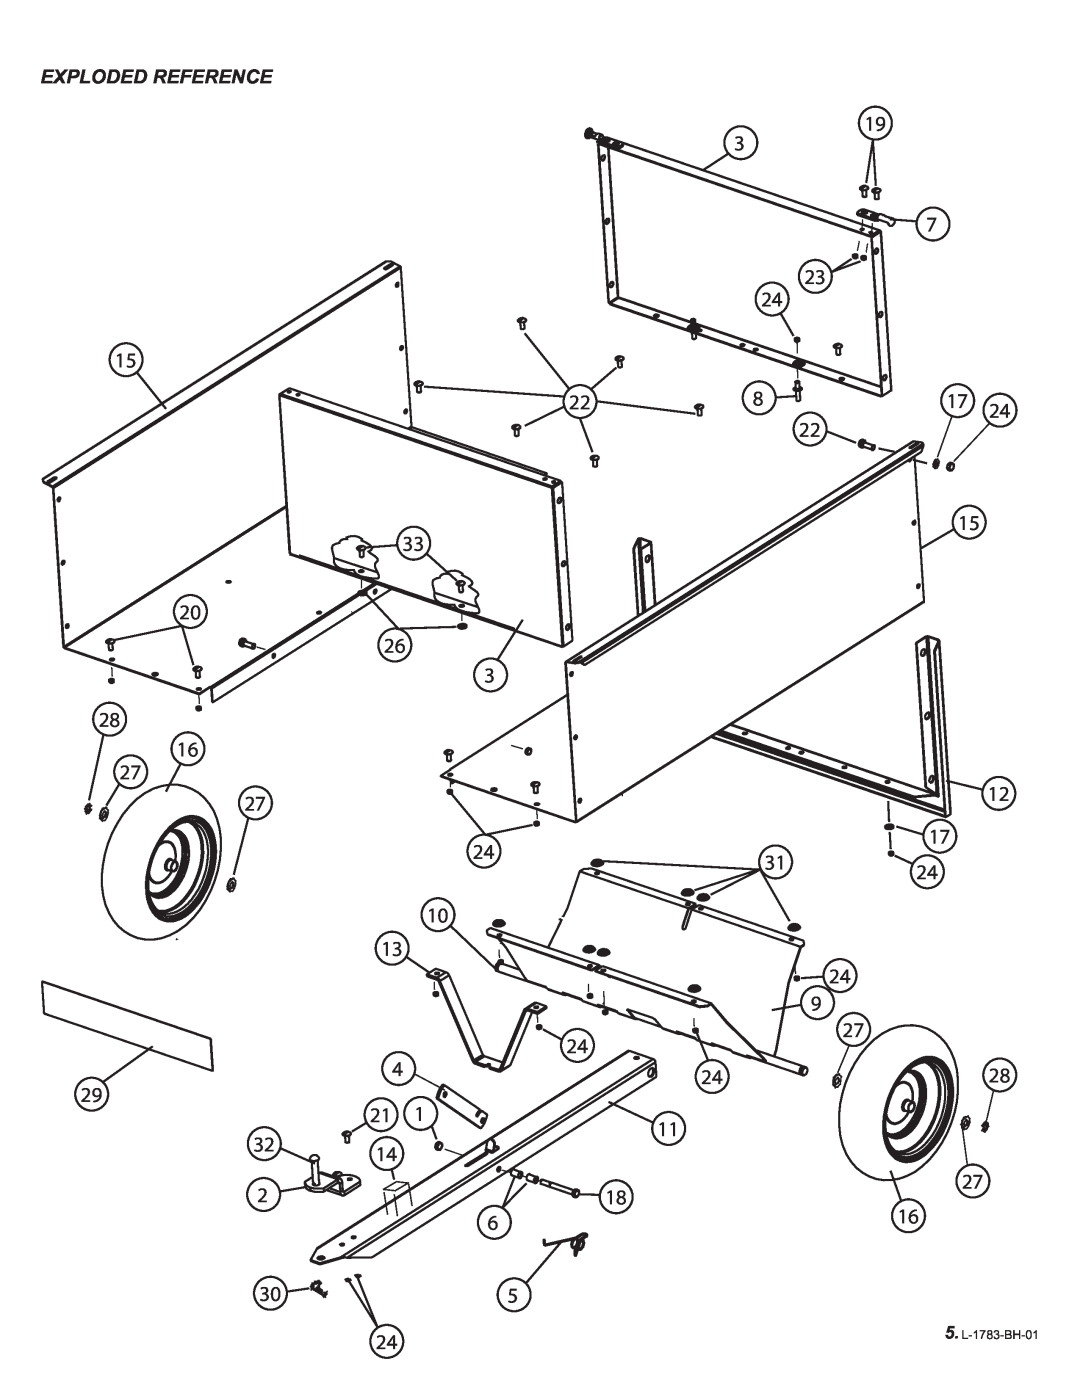 Brinly-Hardy HDC-16L BH, Tow Cart, HDC-10L BH owner manual Exploded Reference, L-1783-BH-01 